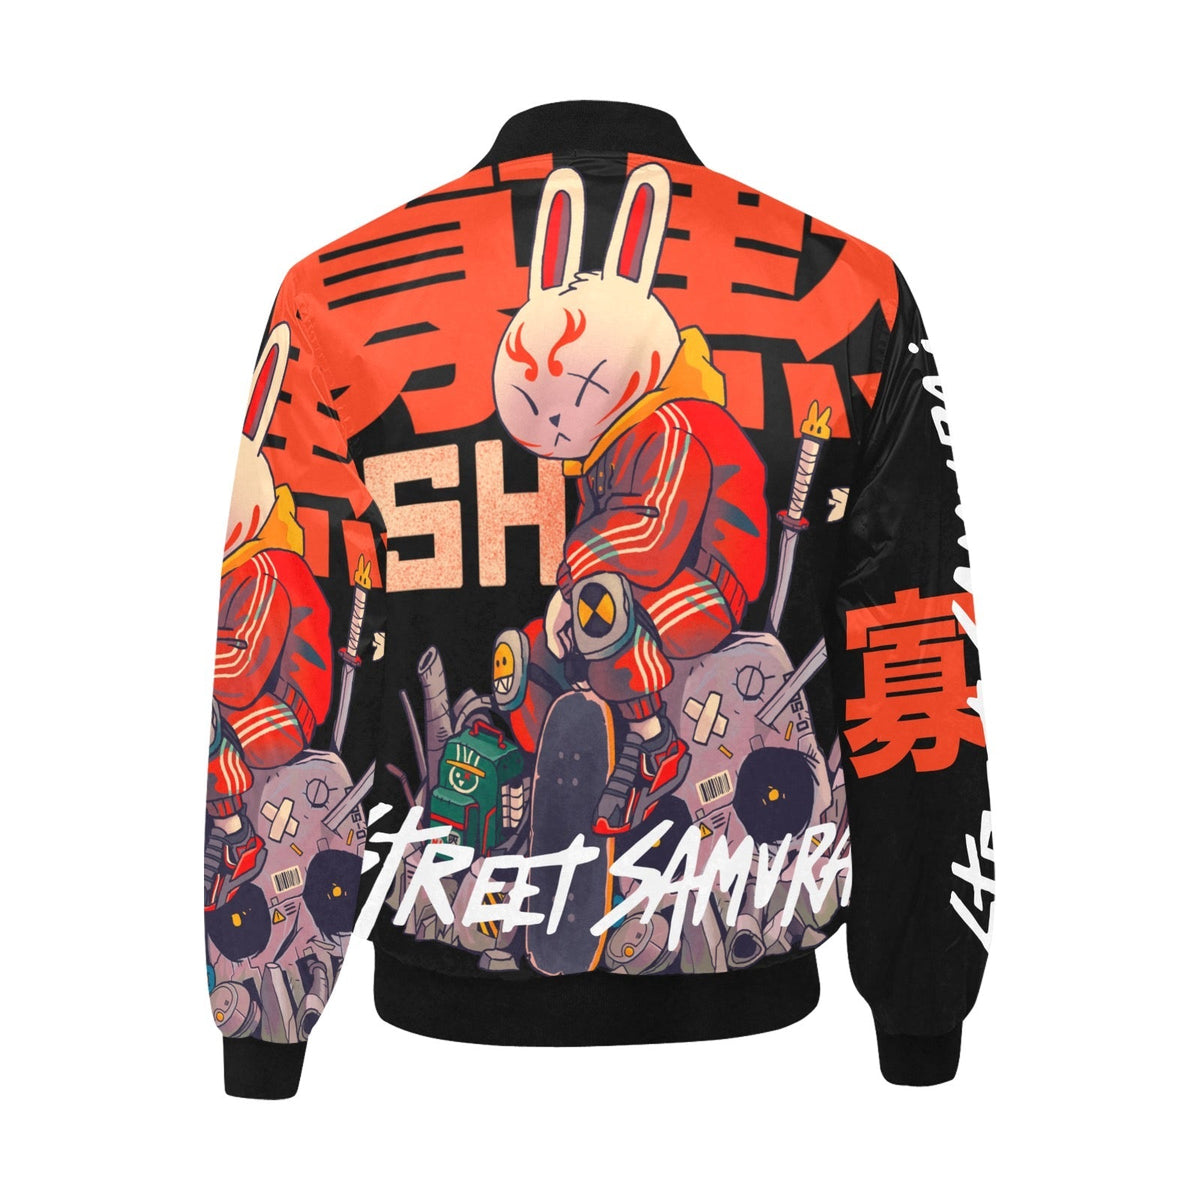 Street Samurai Quilted Bomber Jacket - The Shade Room Shop